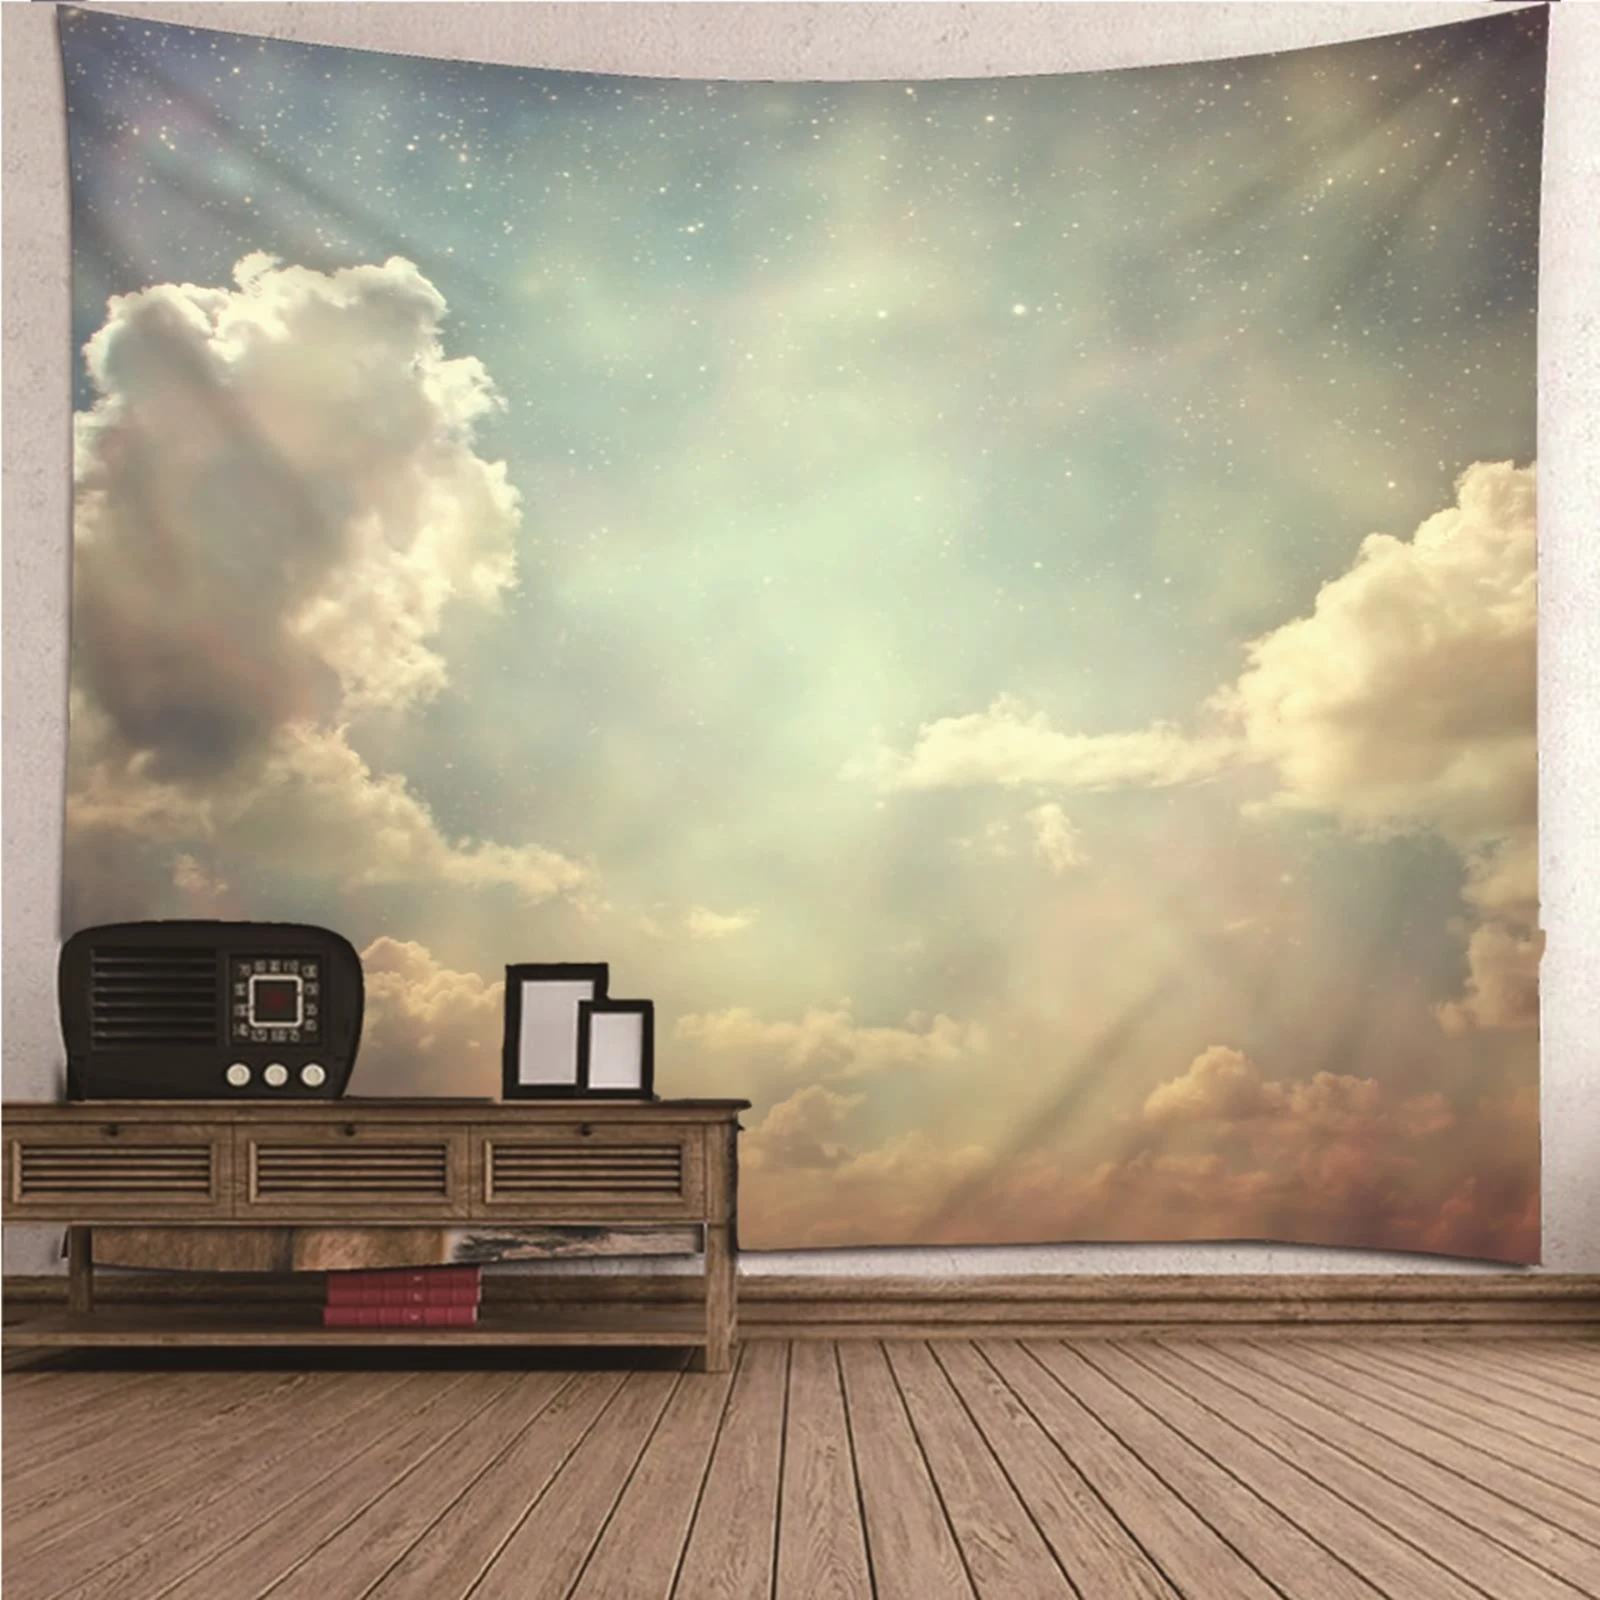 

Tapestry Wall Kit Wall Hanging Living Room natural scenery Sky White Clouds Wall Hanging Blanket Dorm Art Decor Covering